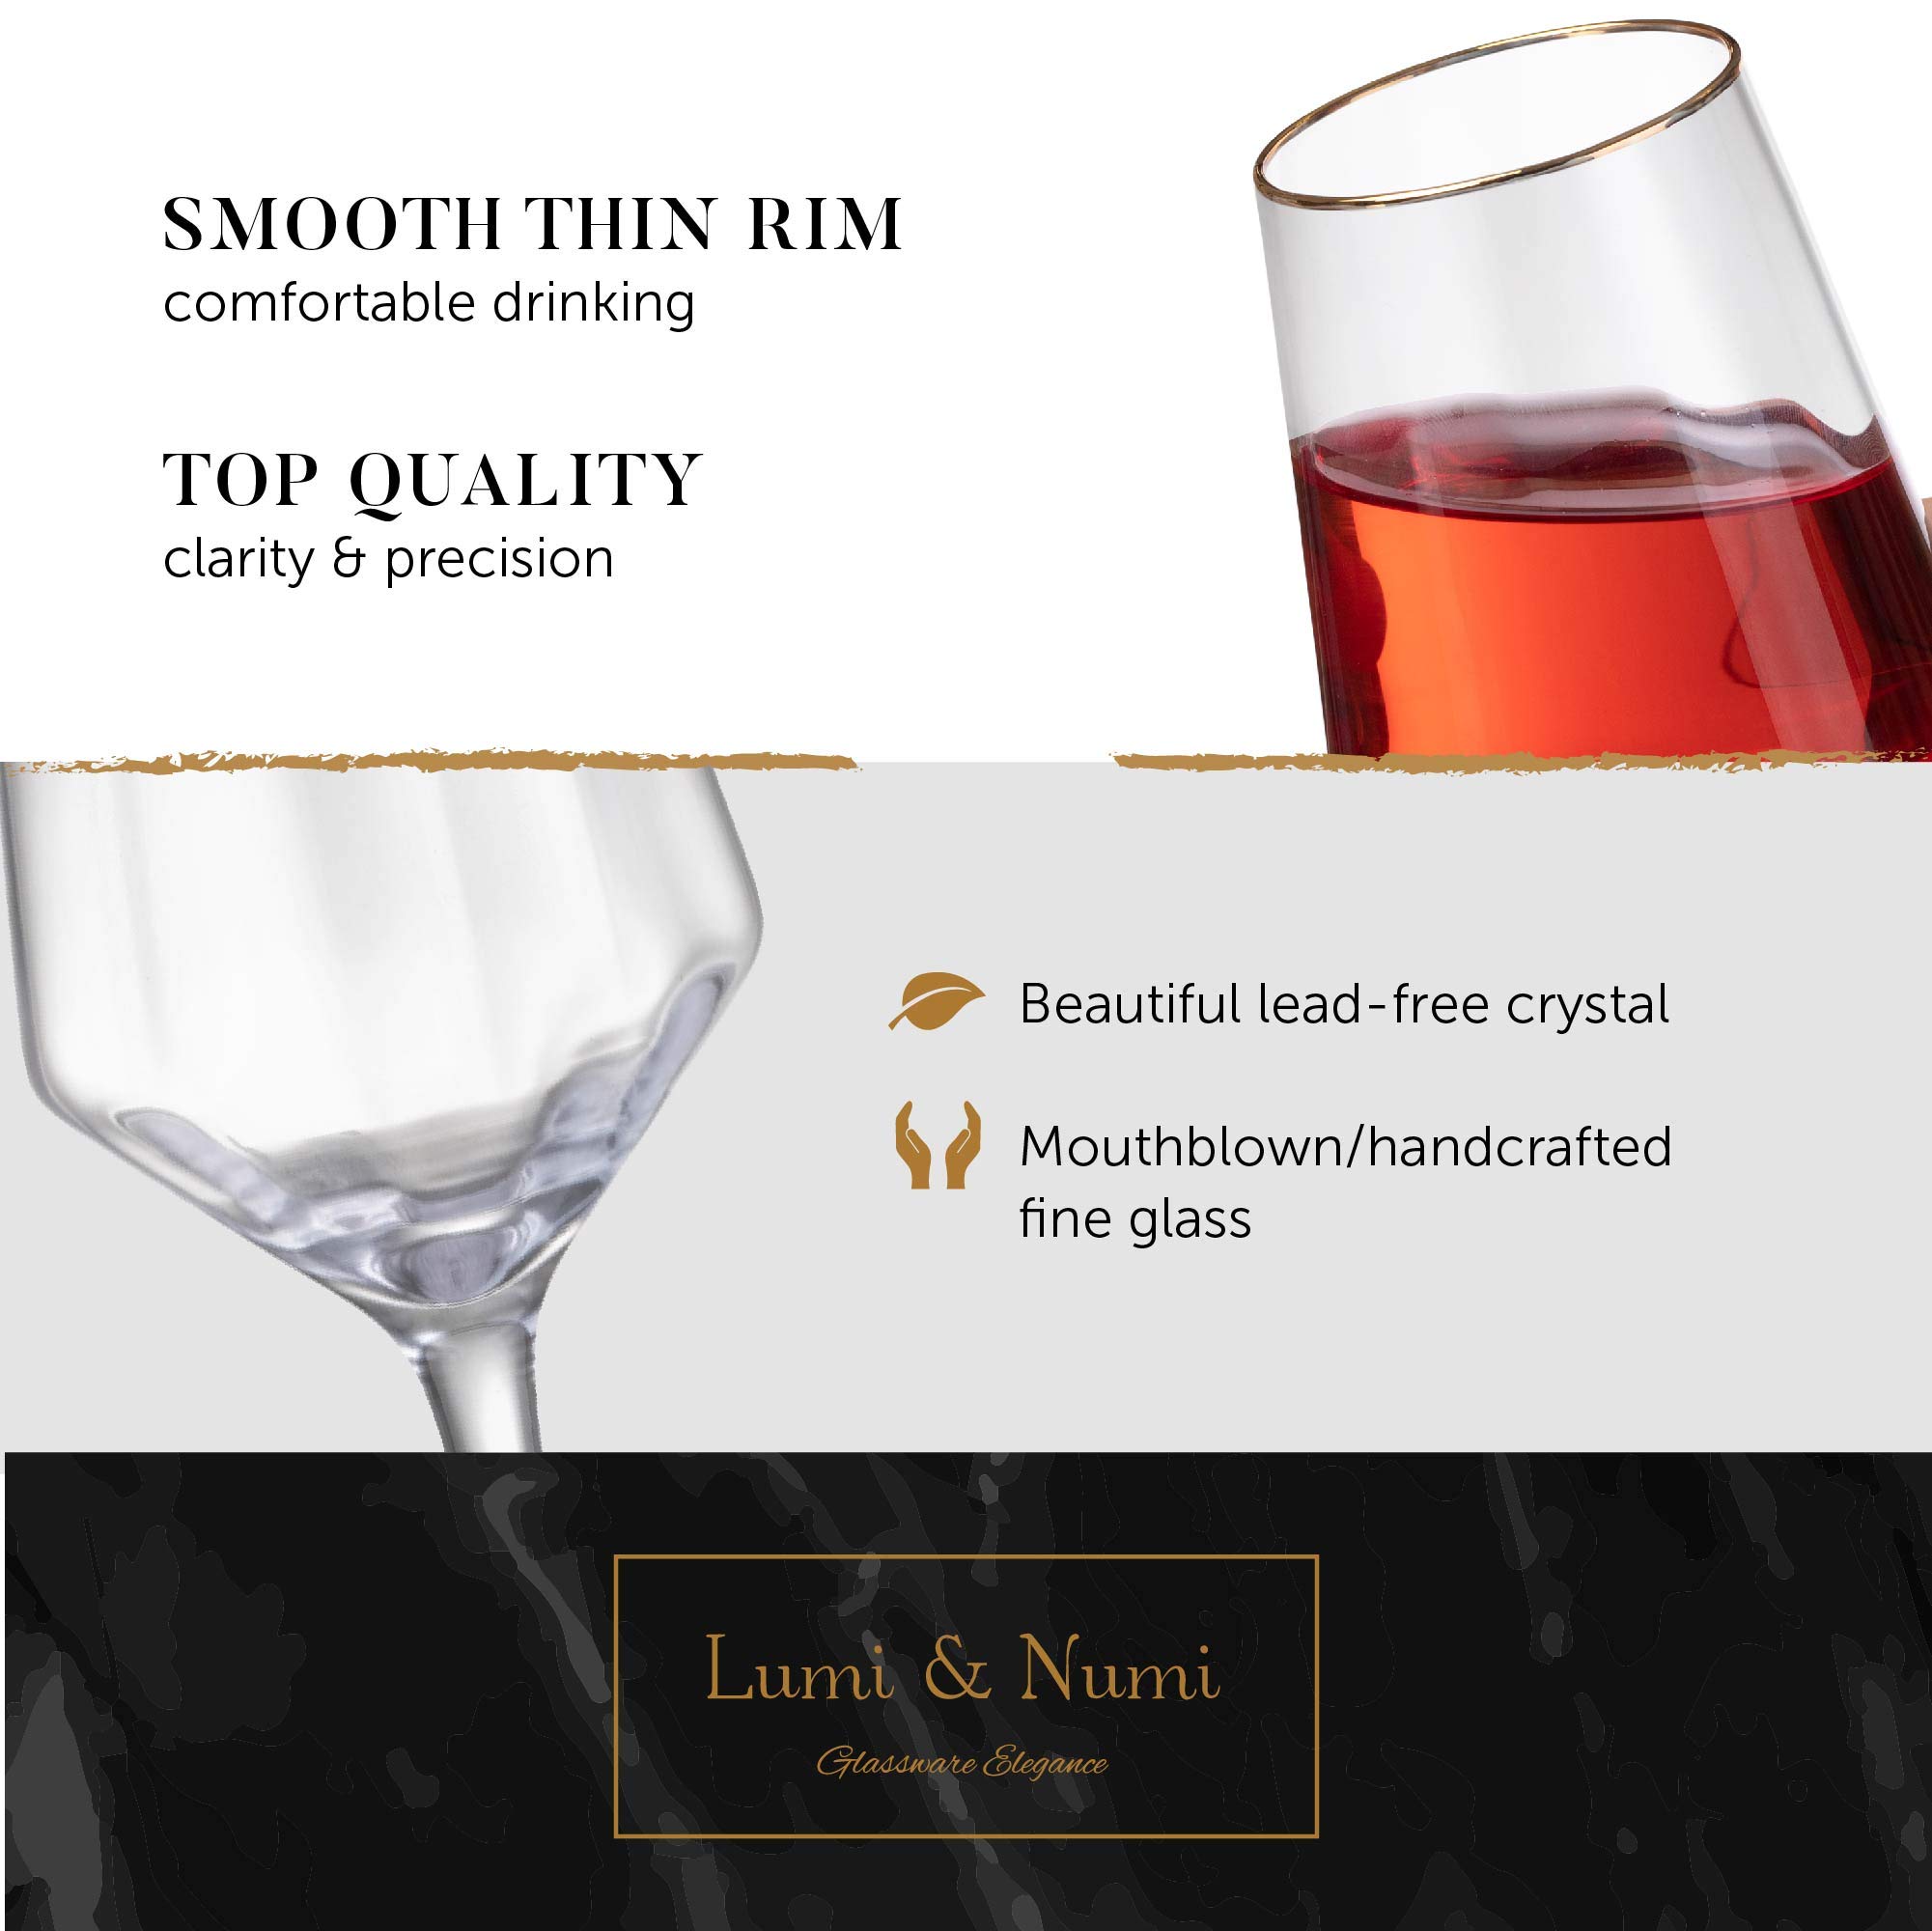 Hand Blown 15.5 Oz Wine Glasses - 24K Gold-Rim - Set of 4 Classic Crystal White & Red Wine Glass + Gold-Plated Wine Bottle Stopper - Lead-Free, Faceted Glass for Entertaining & Gifting by Lumi & Numi